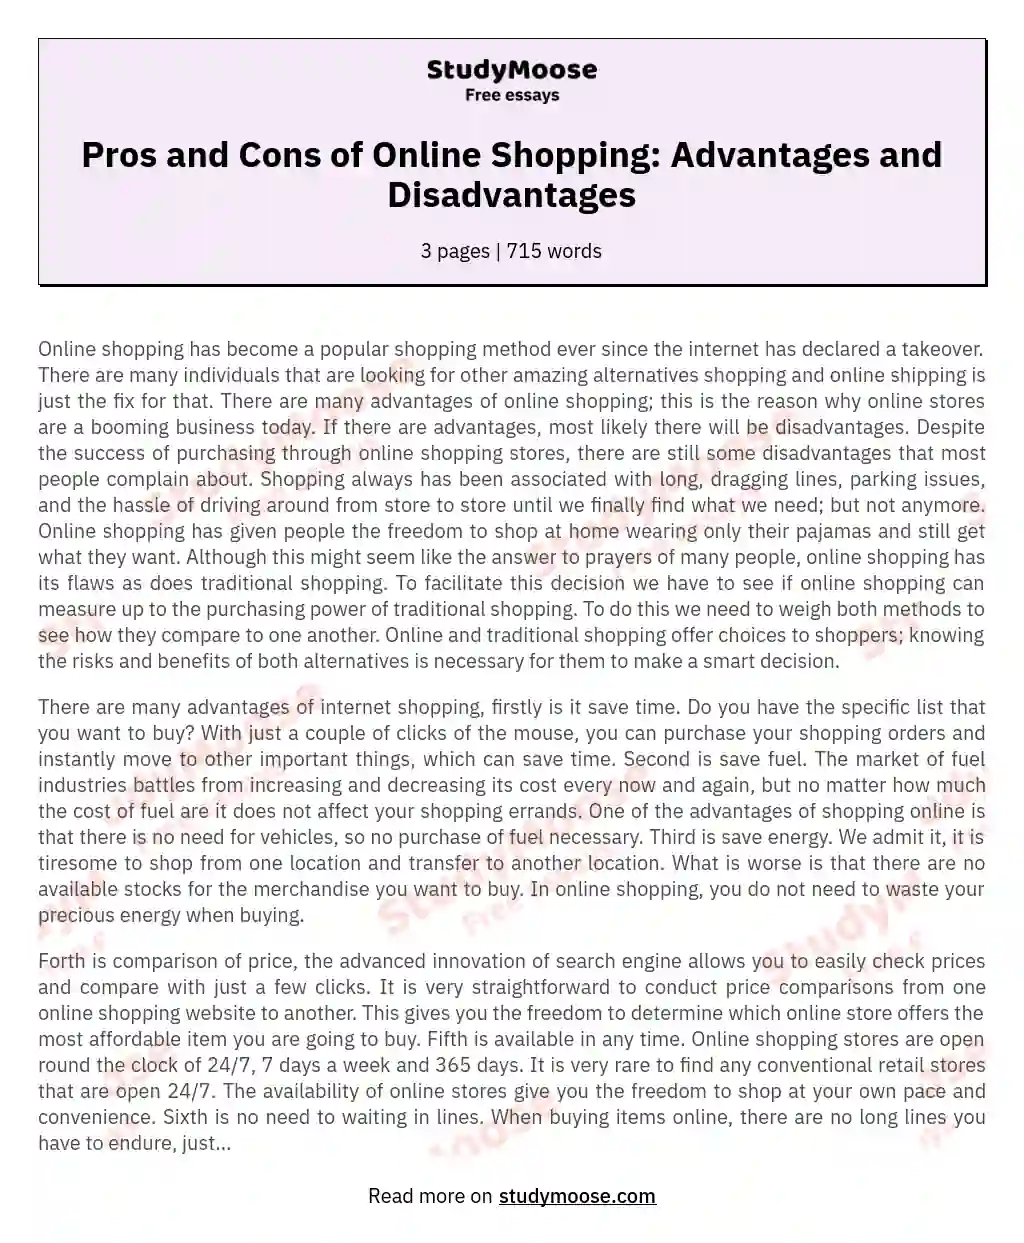 Pros and Cons of Online Shopping: Advantages and Disadvantages essay